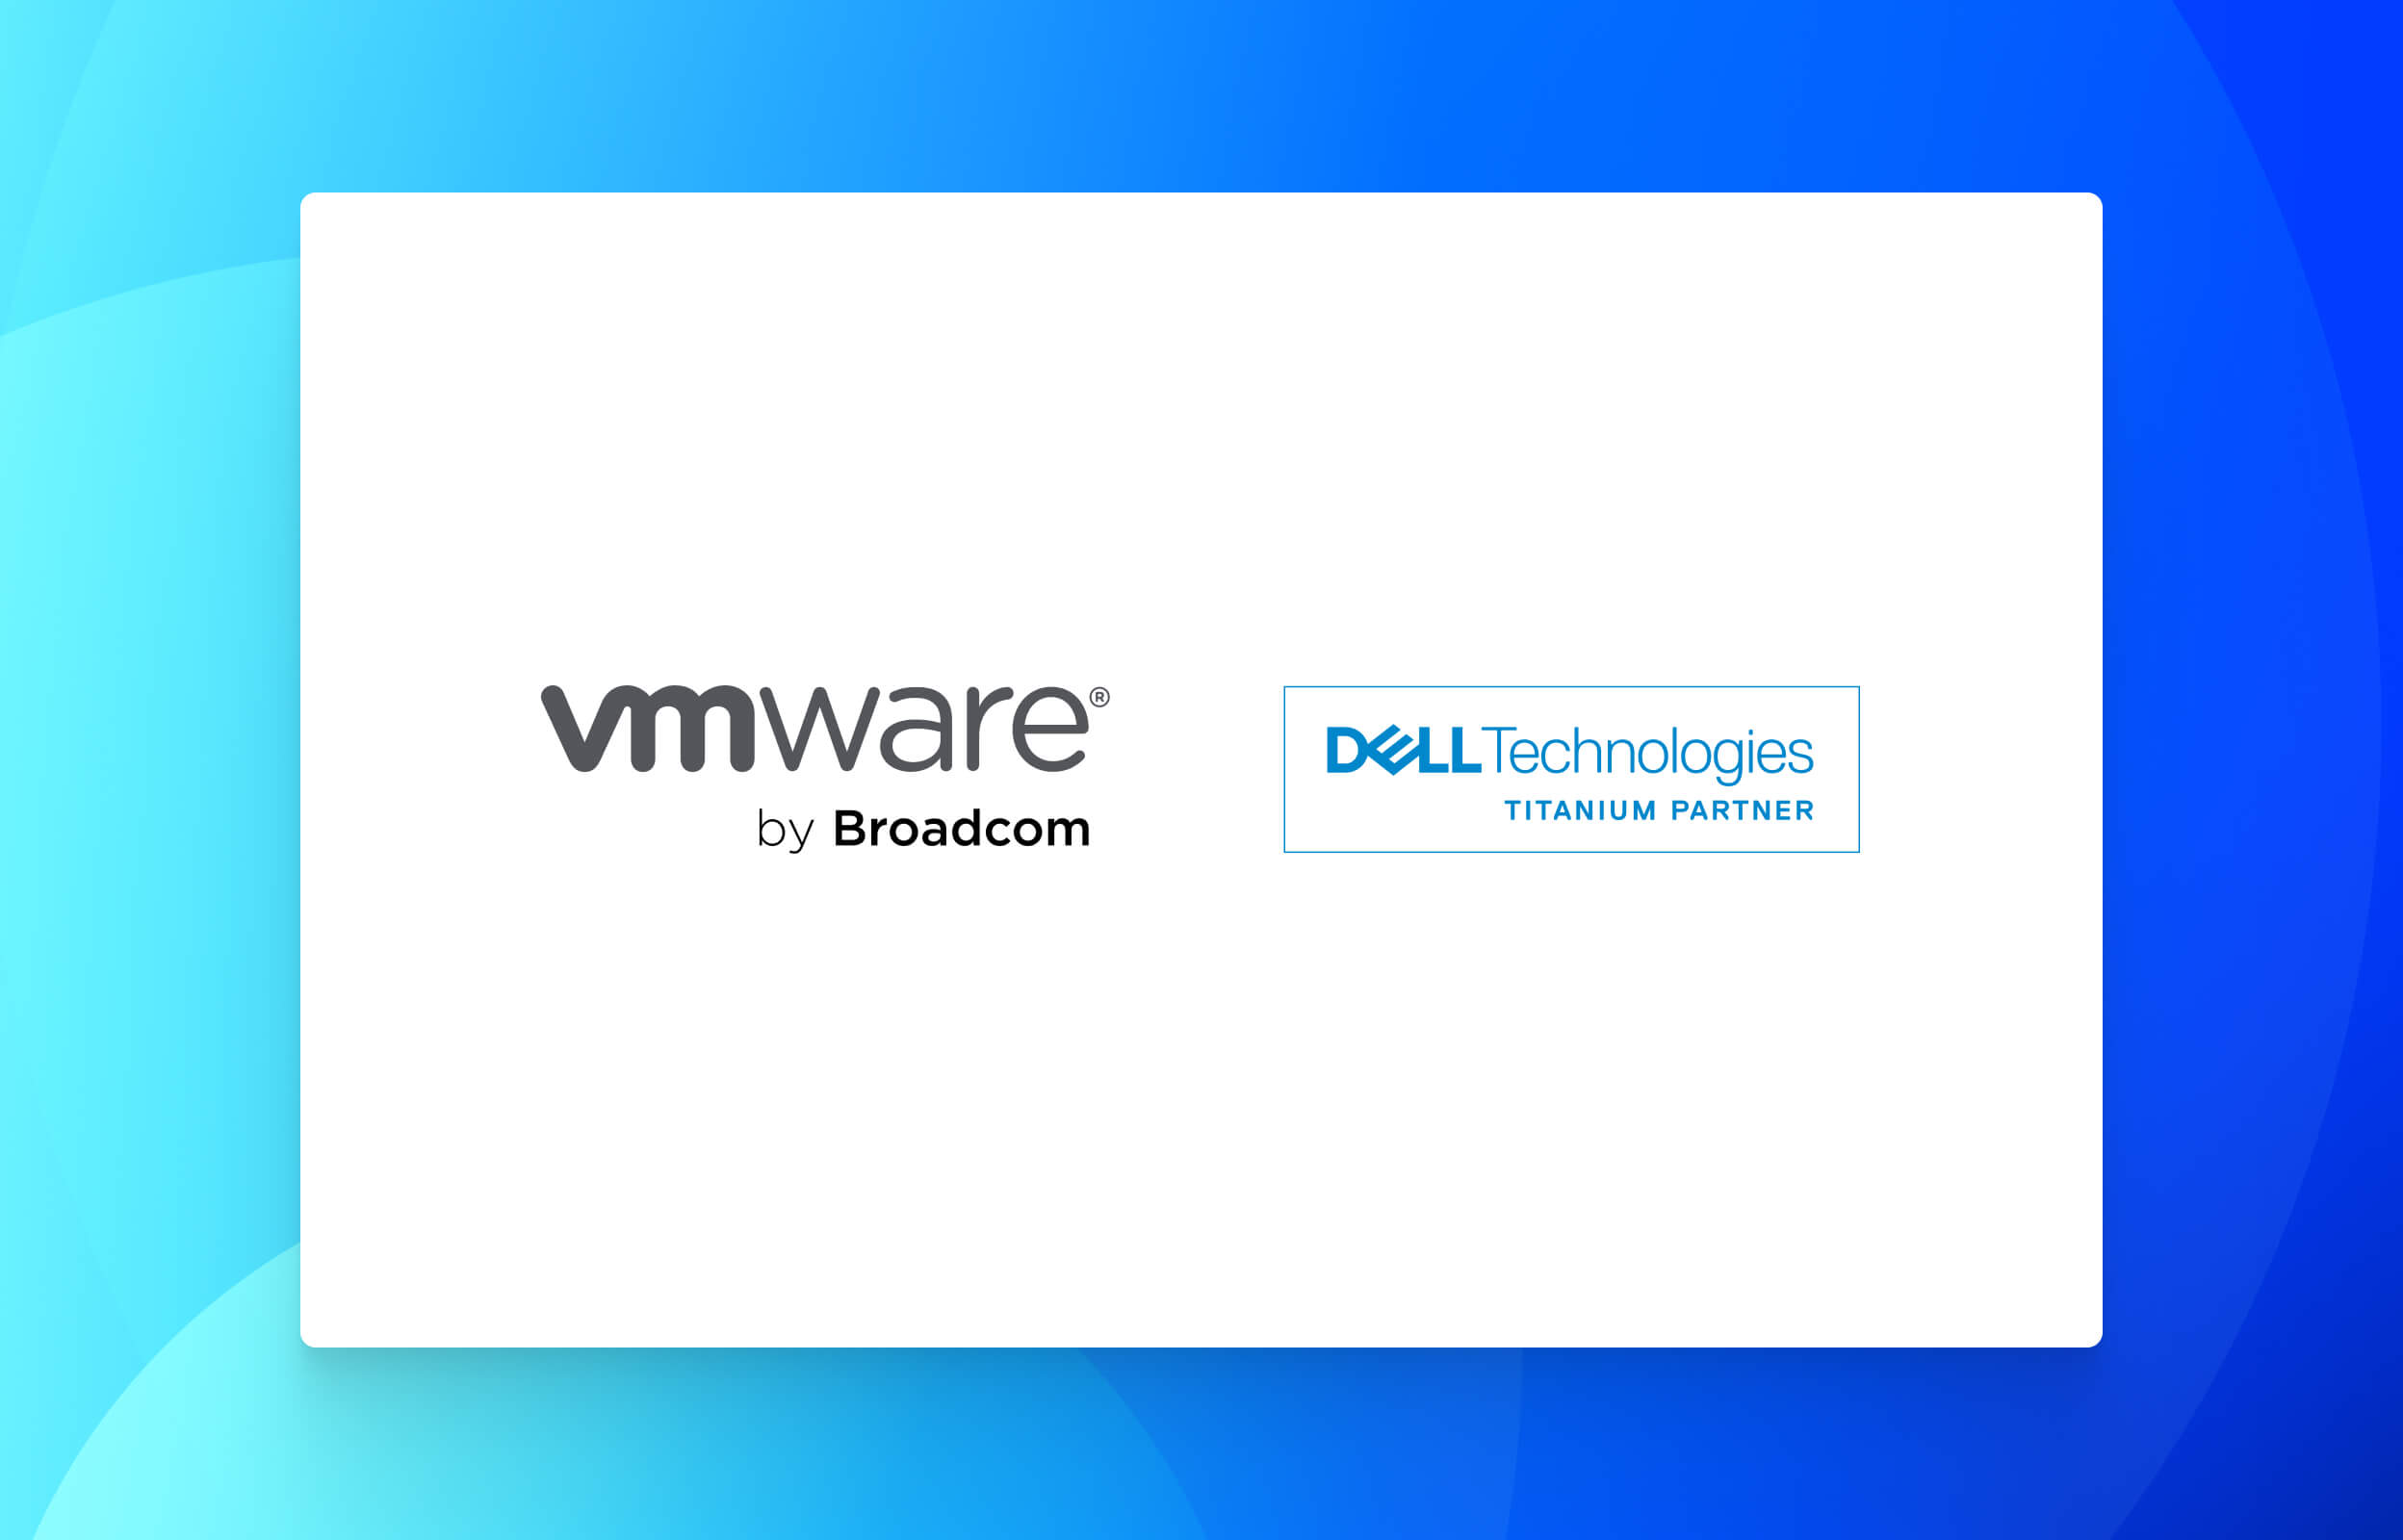 VMWare and Dell Technologies logo lockup with Datacom cloud artwork